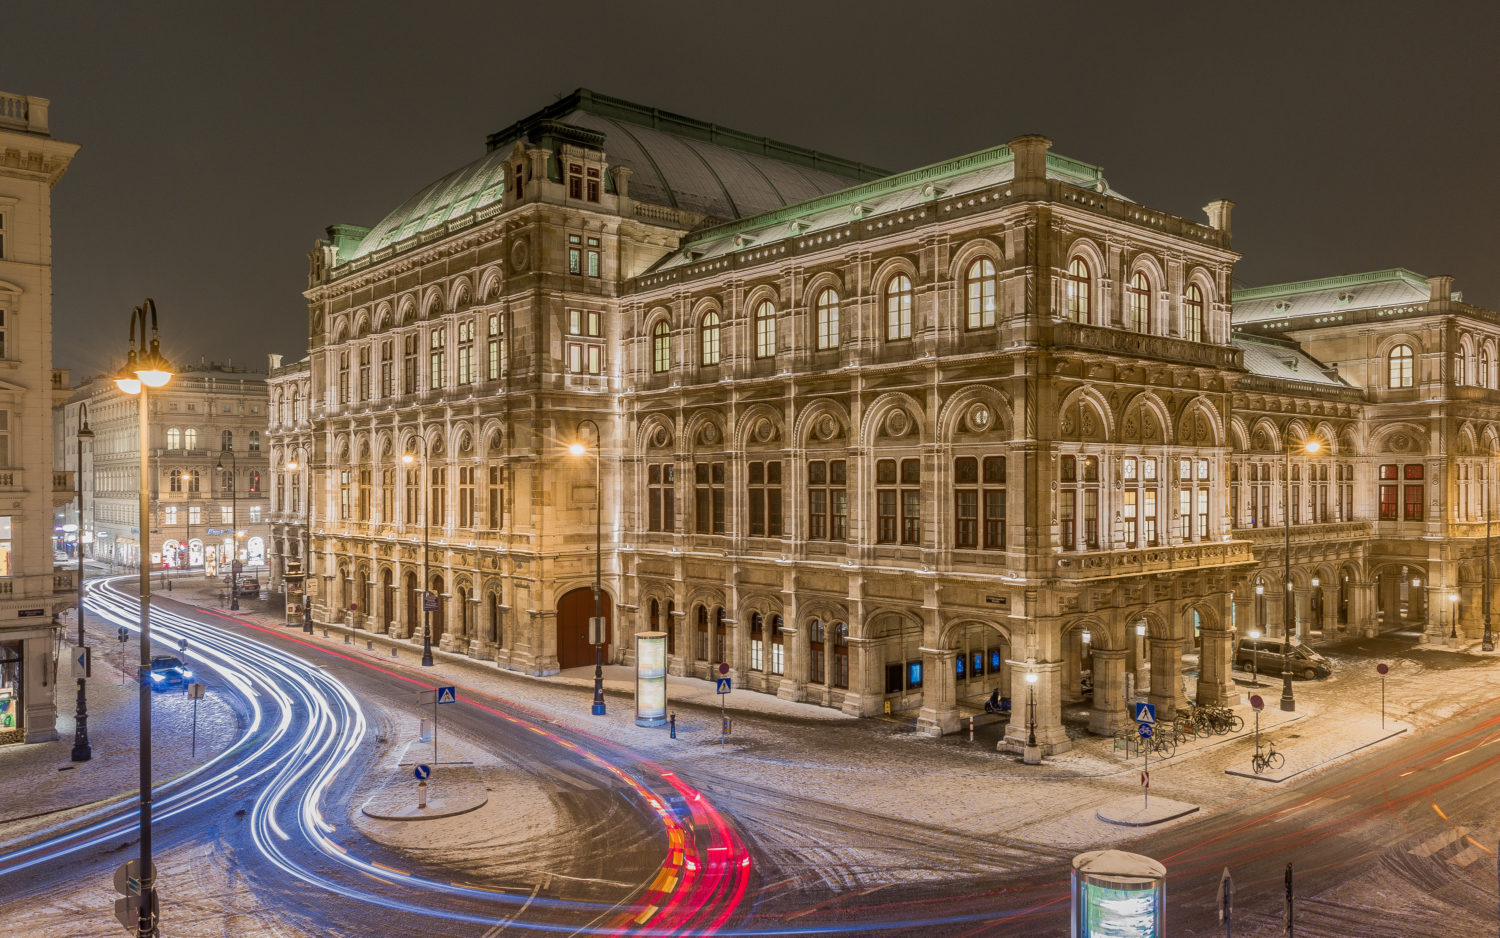 Vienna state opera in the winter night with traffic surrounding it